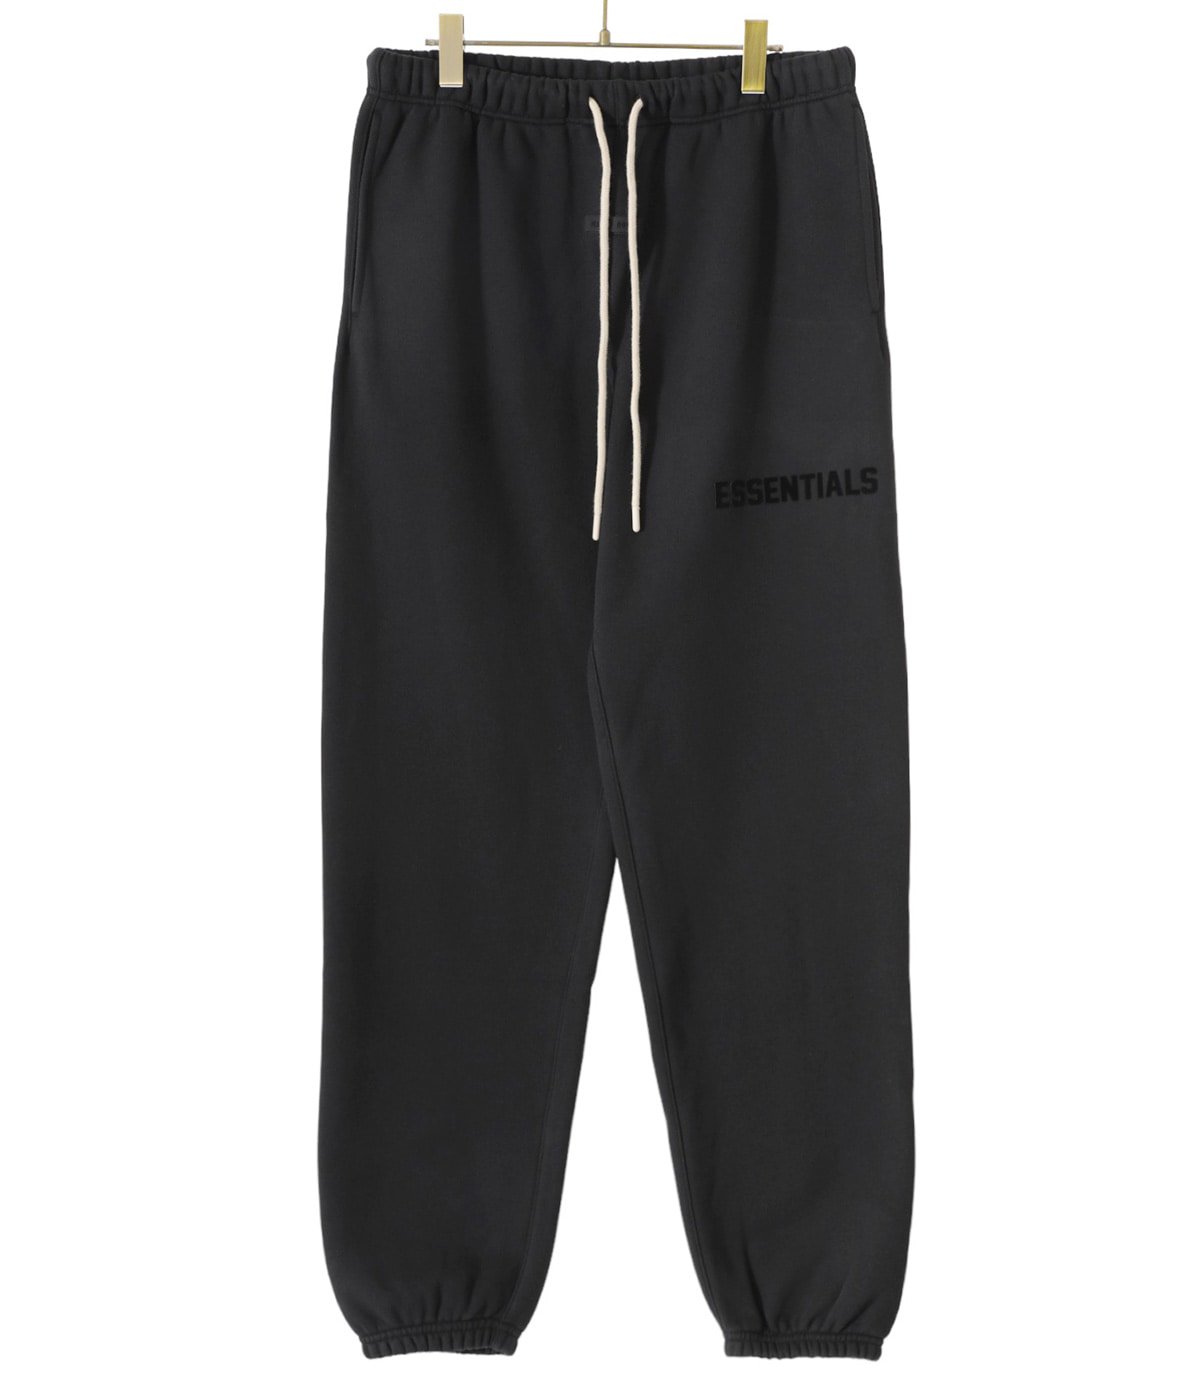 Essentials fear of god sweat pants coral - その他